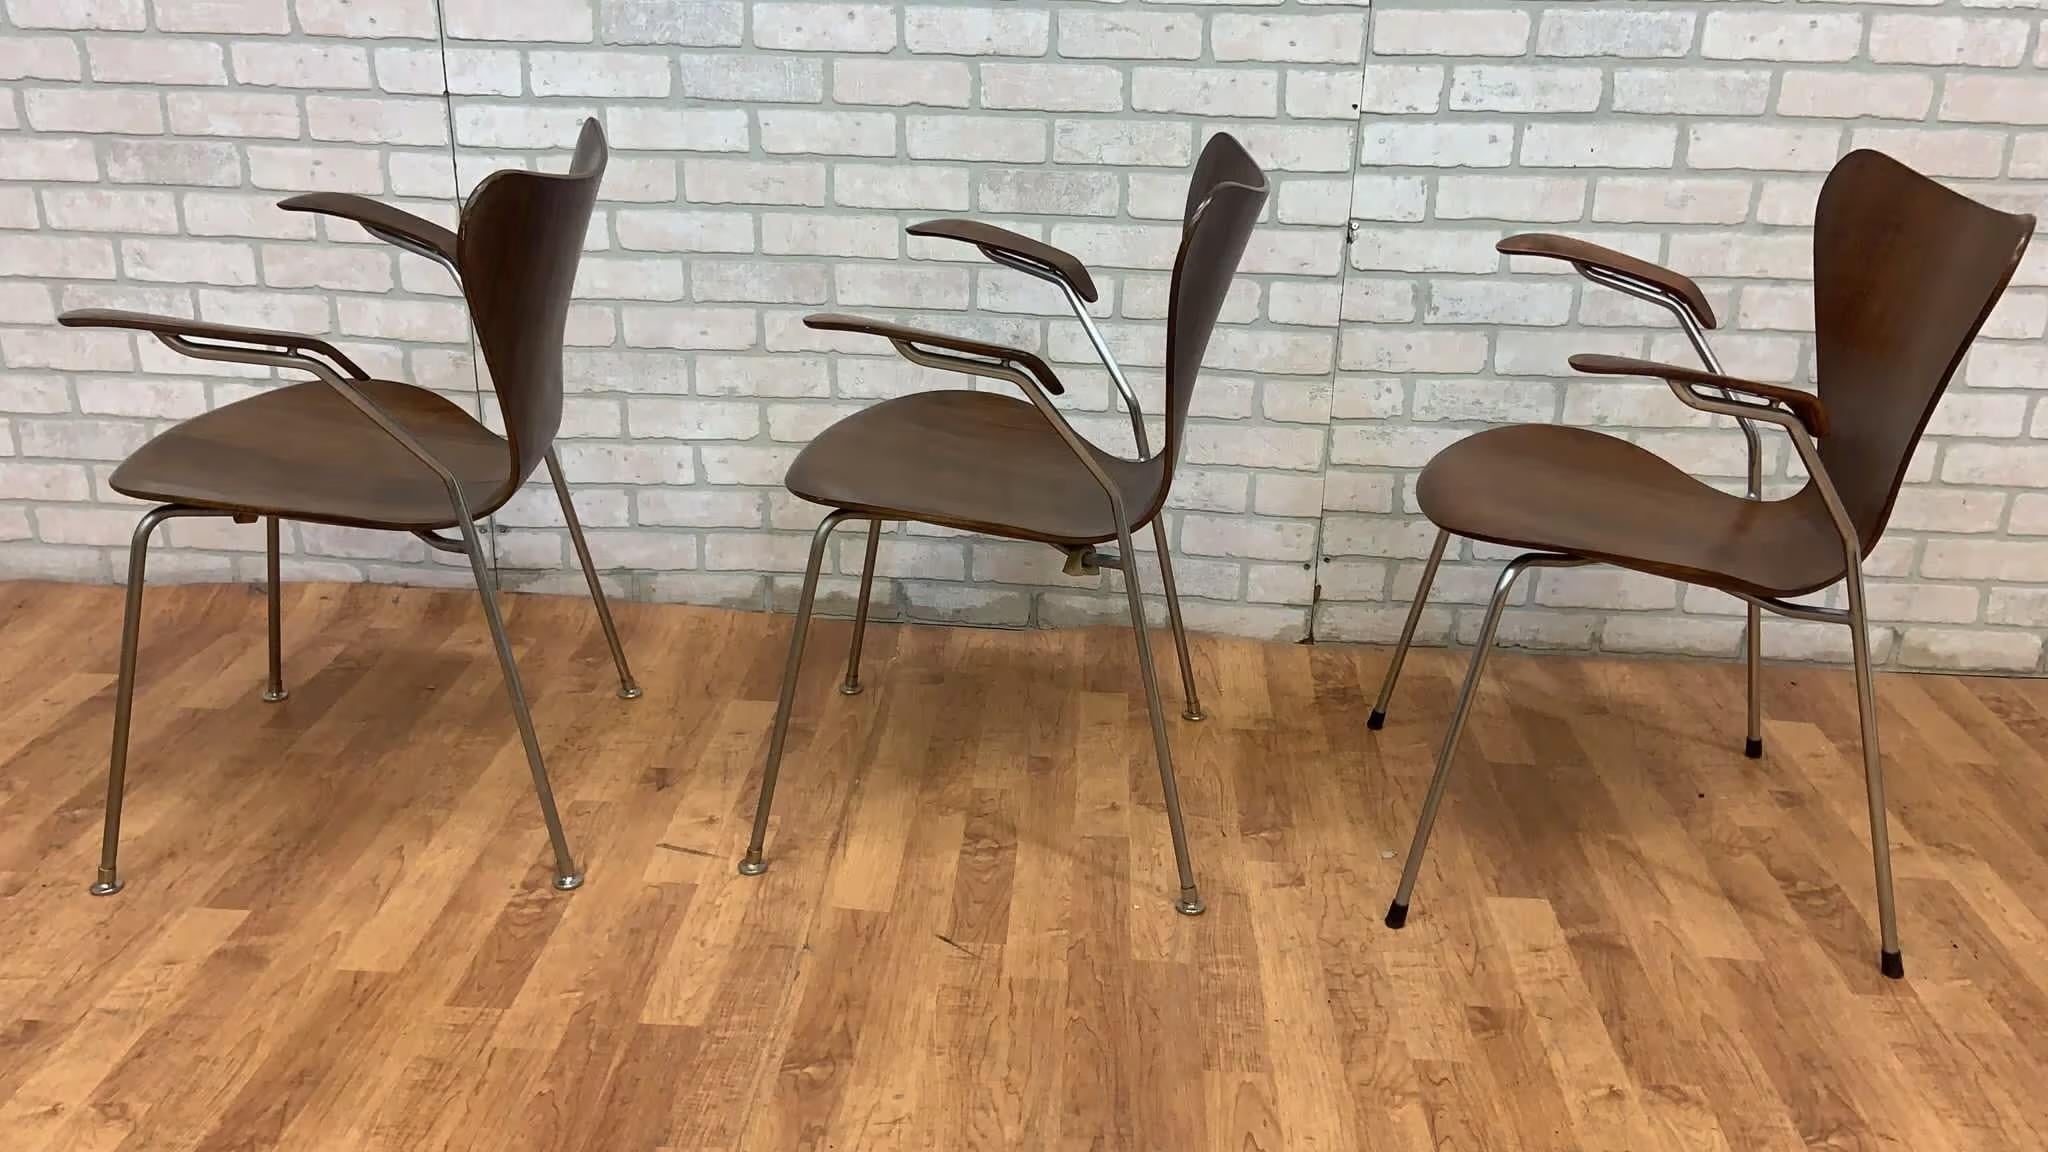 Series 7 Butterfly Teak Armchairs by Arne Jacobsen for Fritz Hansen - Set of 3 In Good Condition For Sale In Chicago, IL